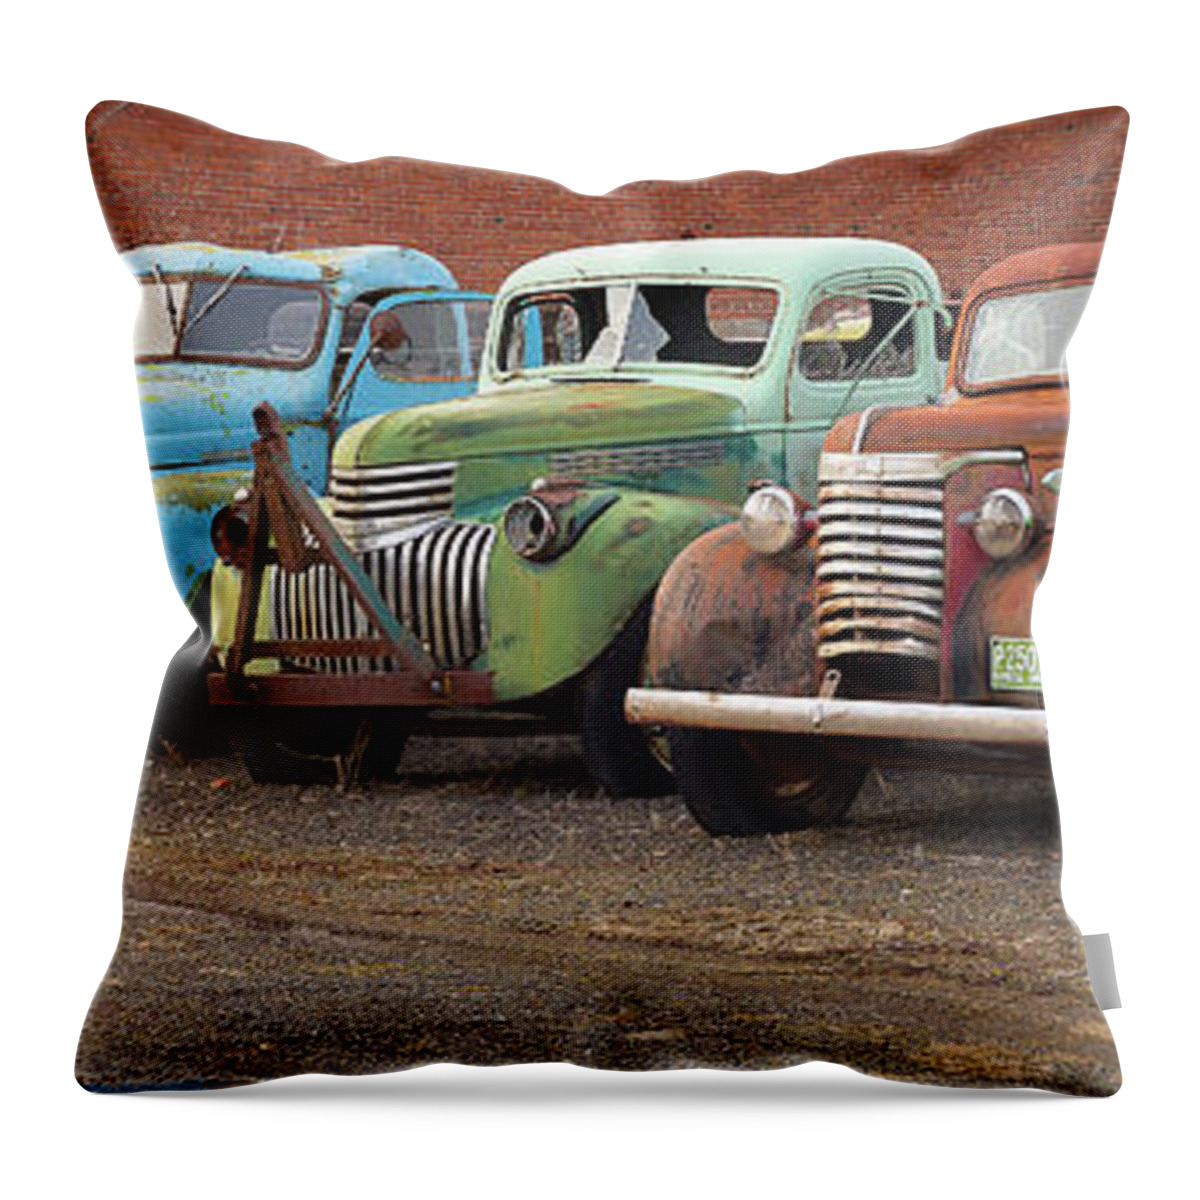 Dave's Old Truck Rescue Throw Pillow featuring the photograph Old Buddies by Idaho Scenic Images Linda Lantzy